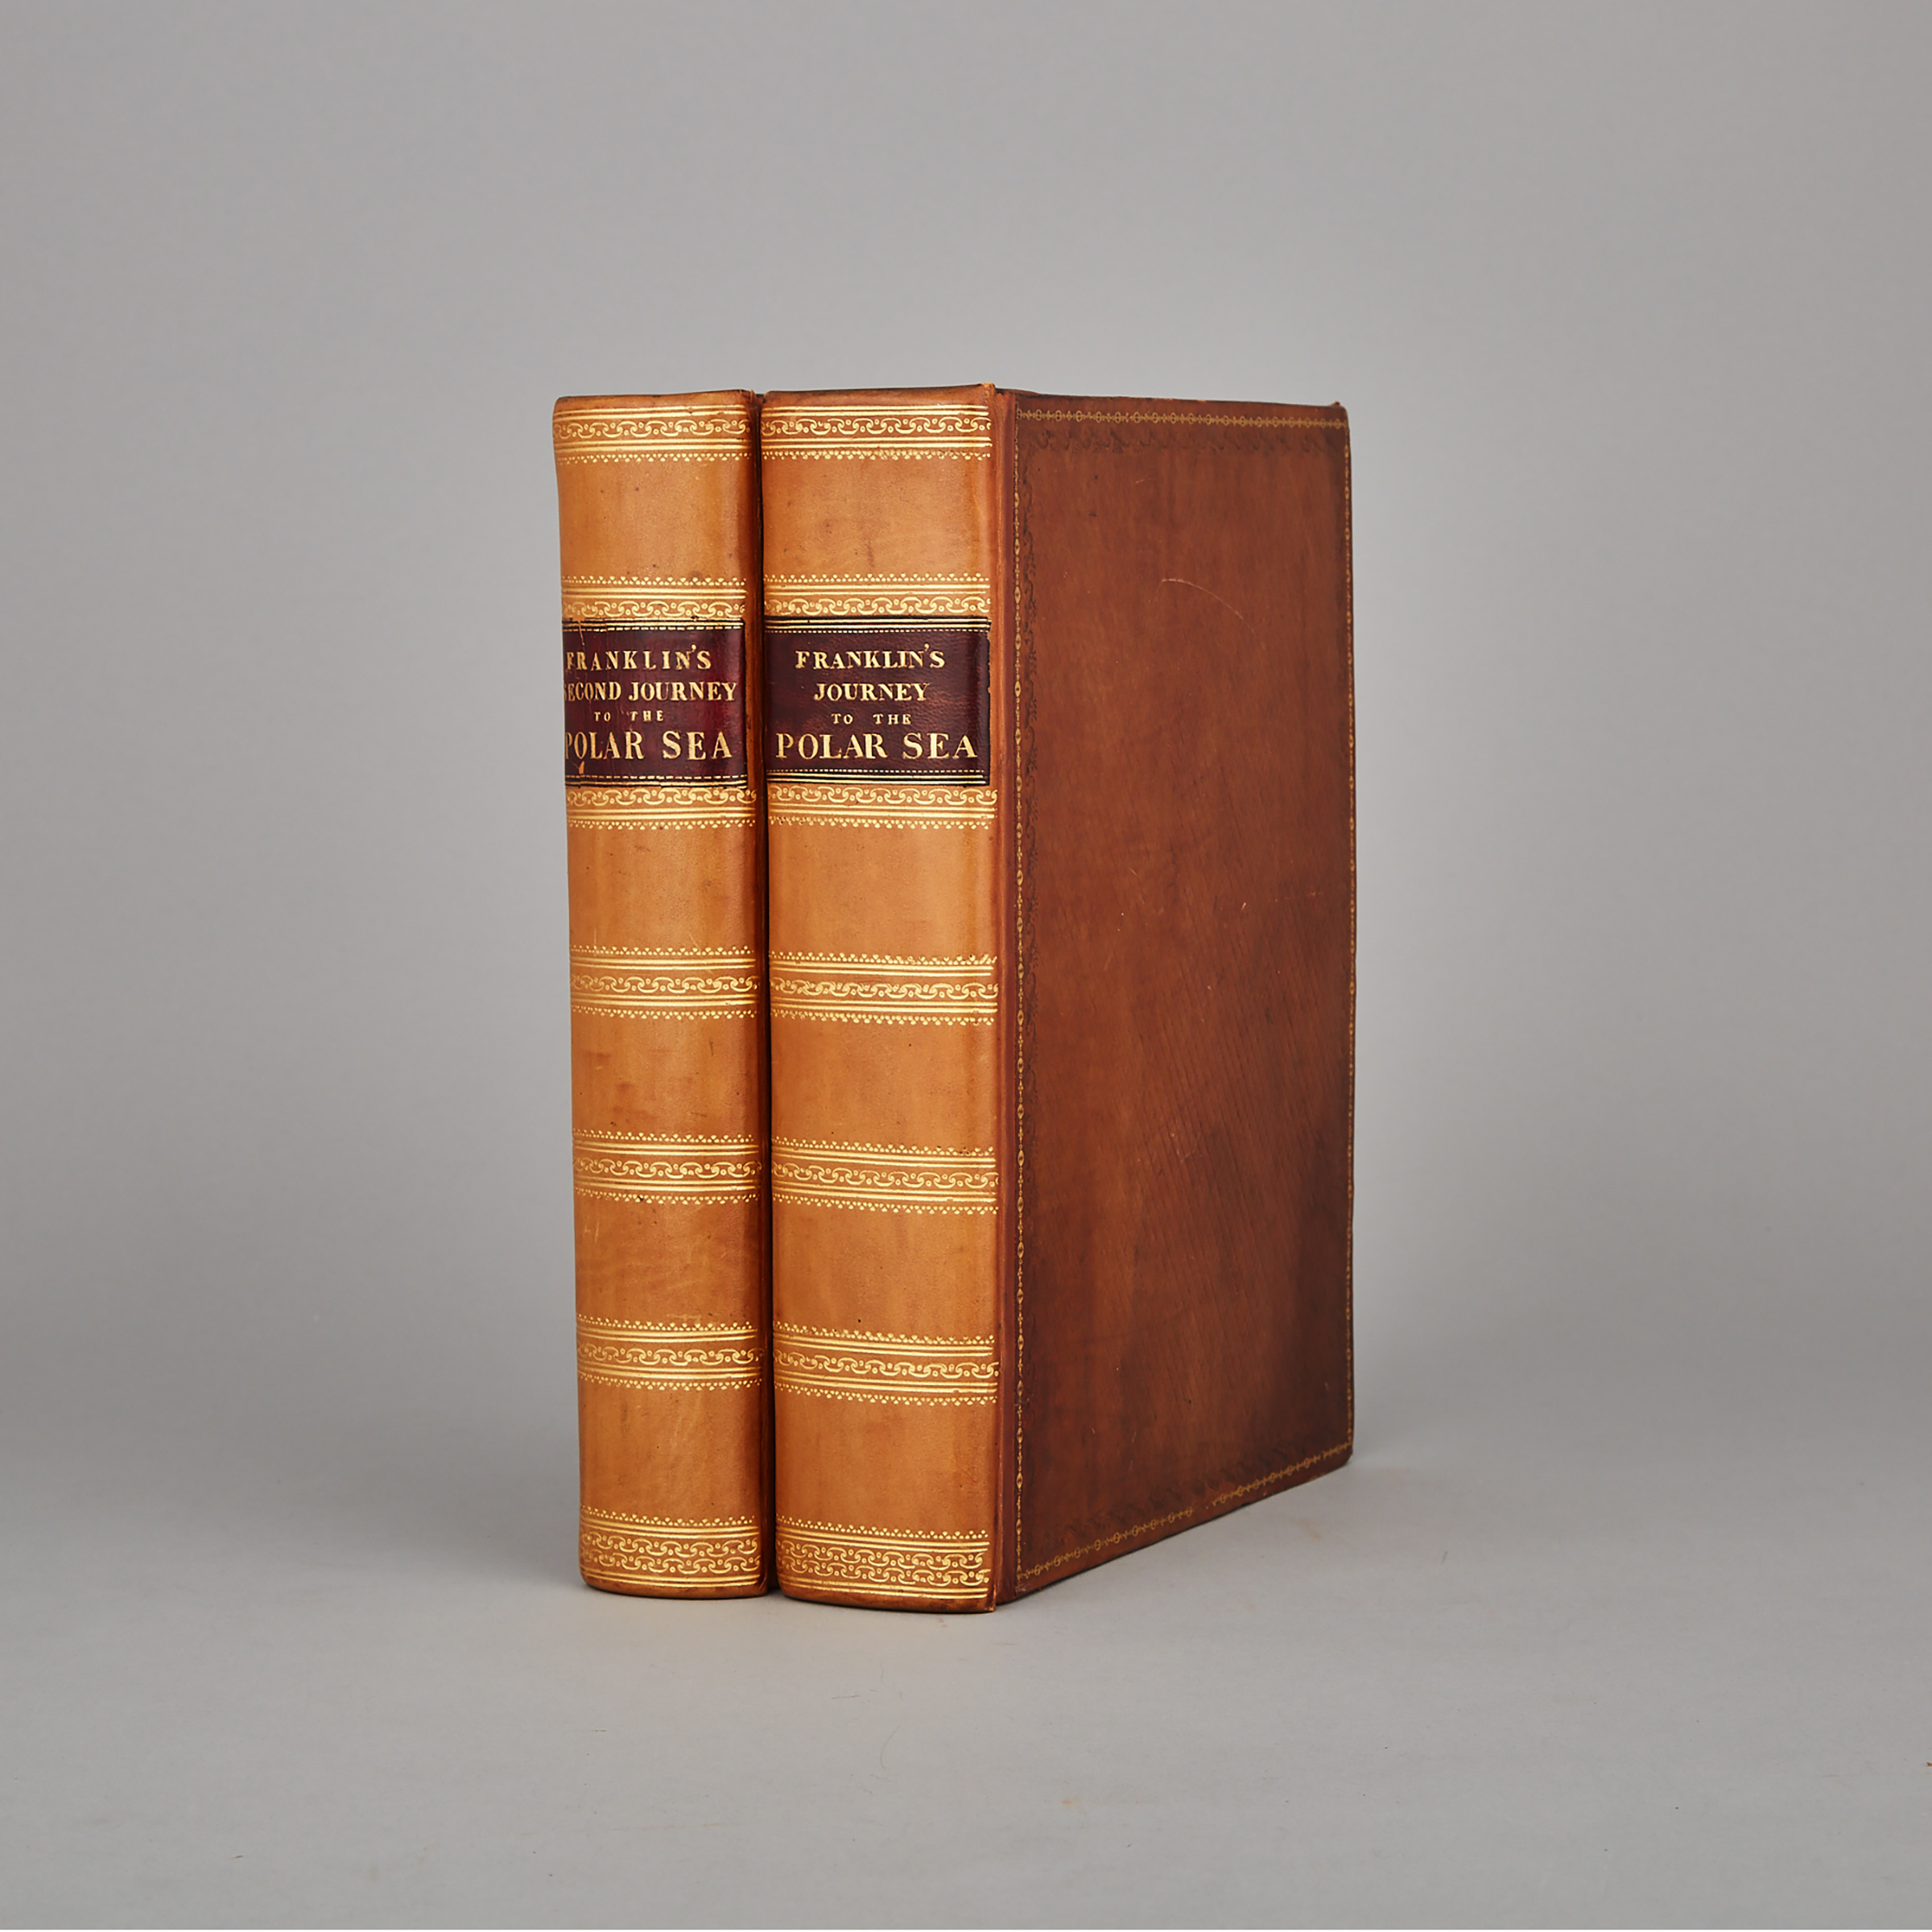 Sir John Franklin (1786-1847)
Two Volumes: Narrative of a Journey to the Shores of the Polar Sea, in the Years 1819, 20 21, and 22, (1823) and Narrative of the Second Expedition to the Shores of the Polar Sea, in the years 1825, 1826, and 1827, (1828)